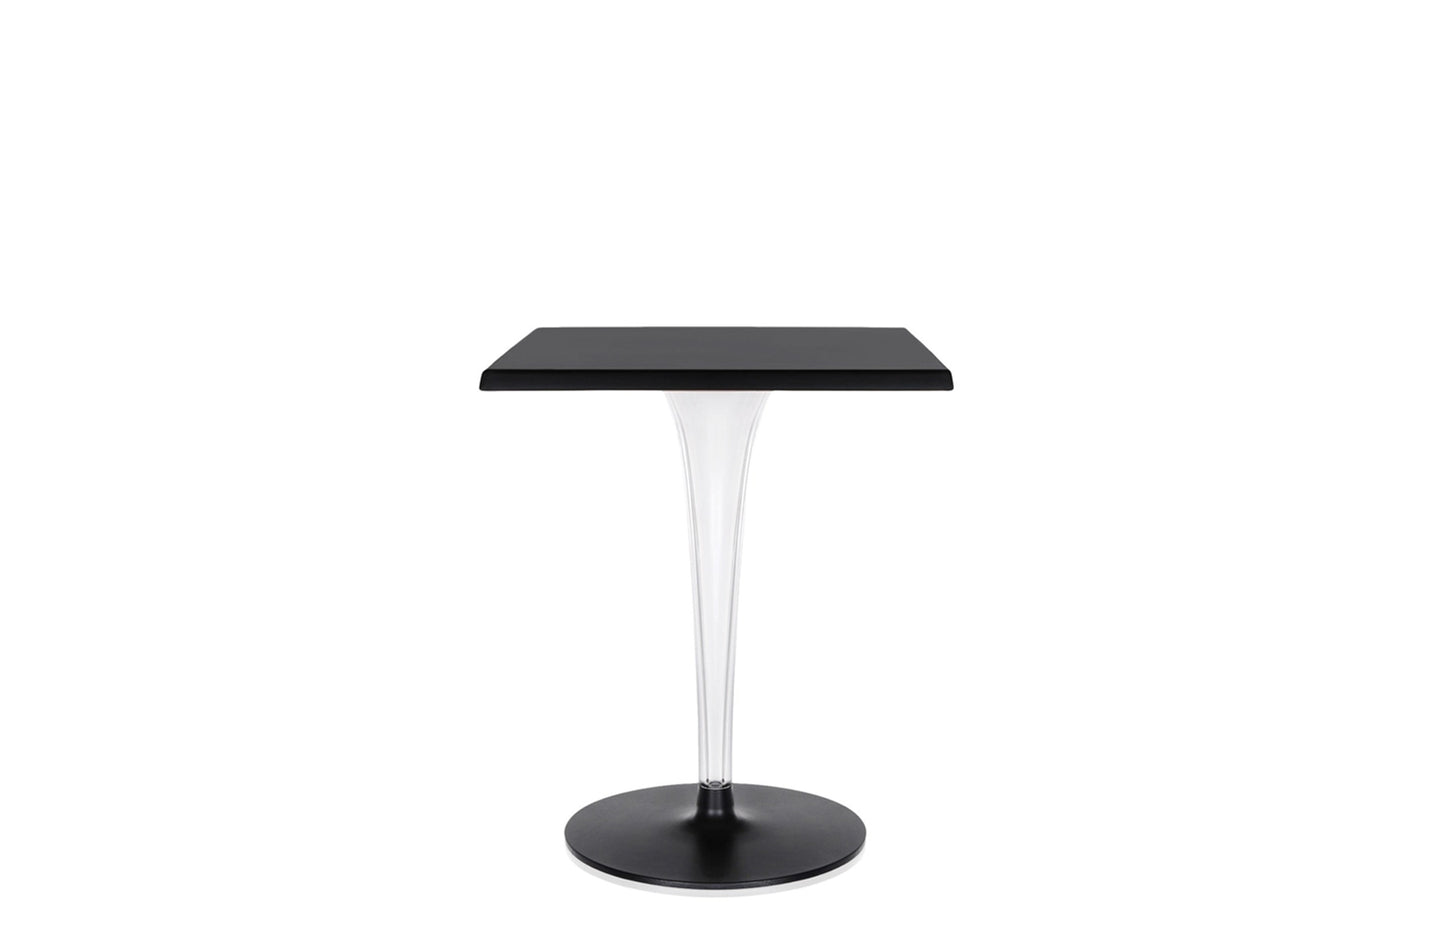 TopTop for Dr. YES Small Square Table - Round Leg
